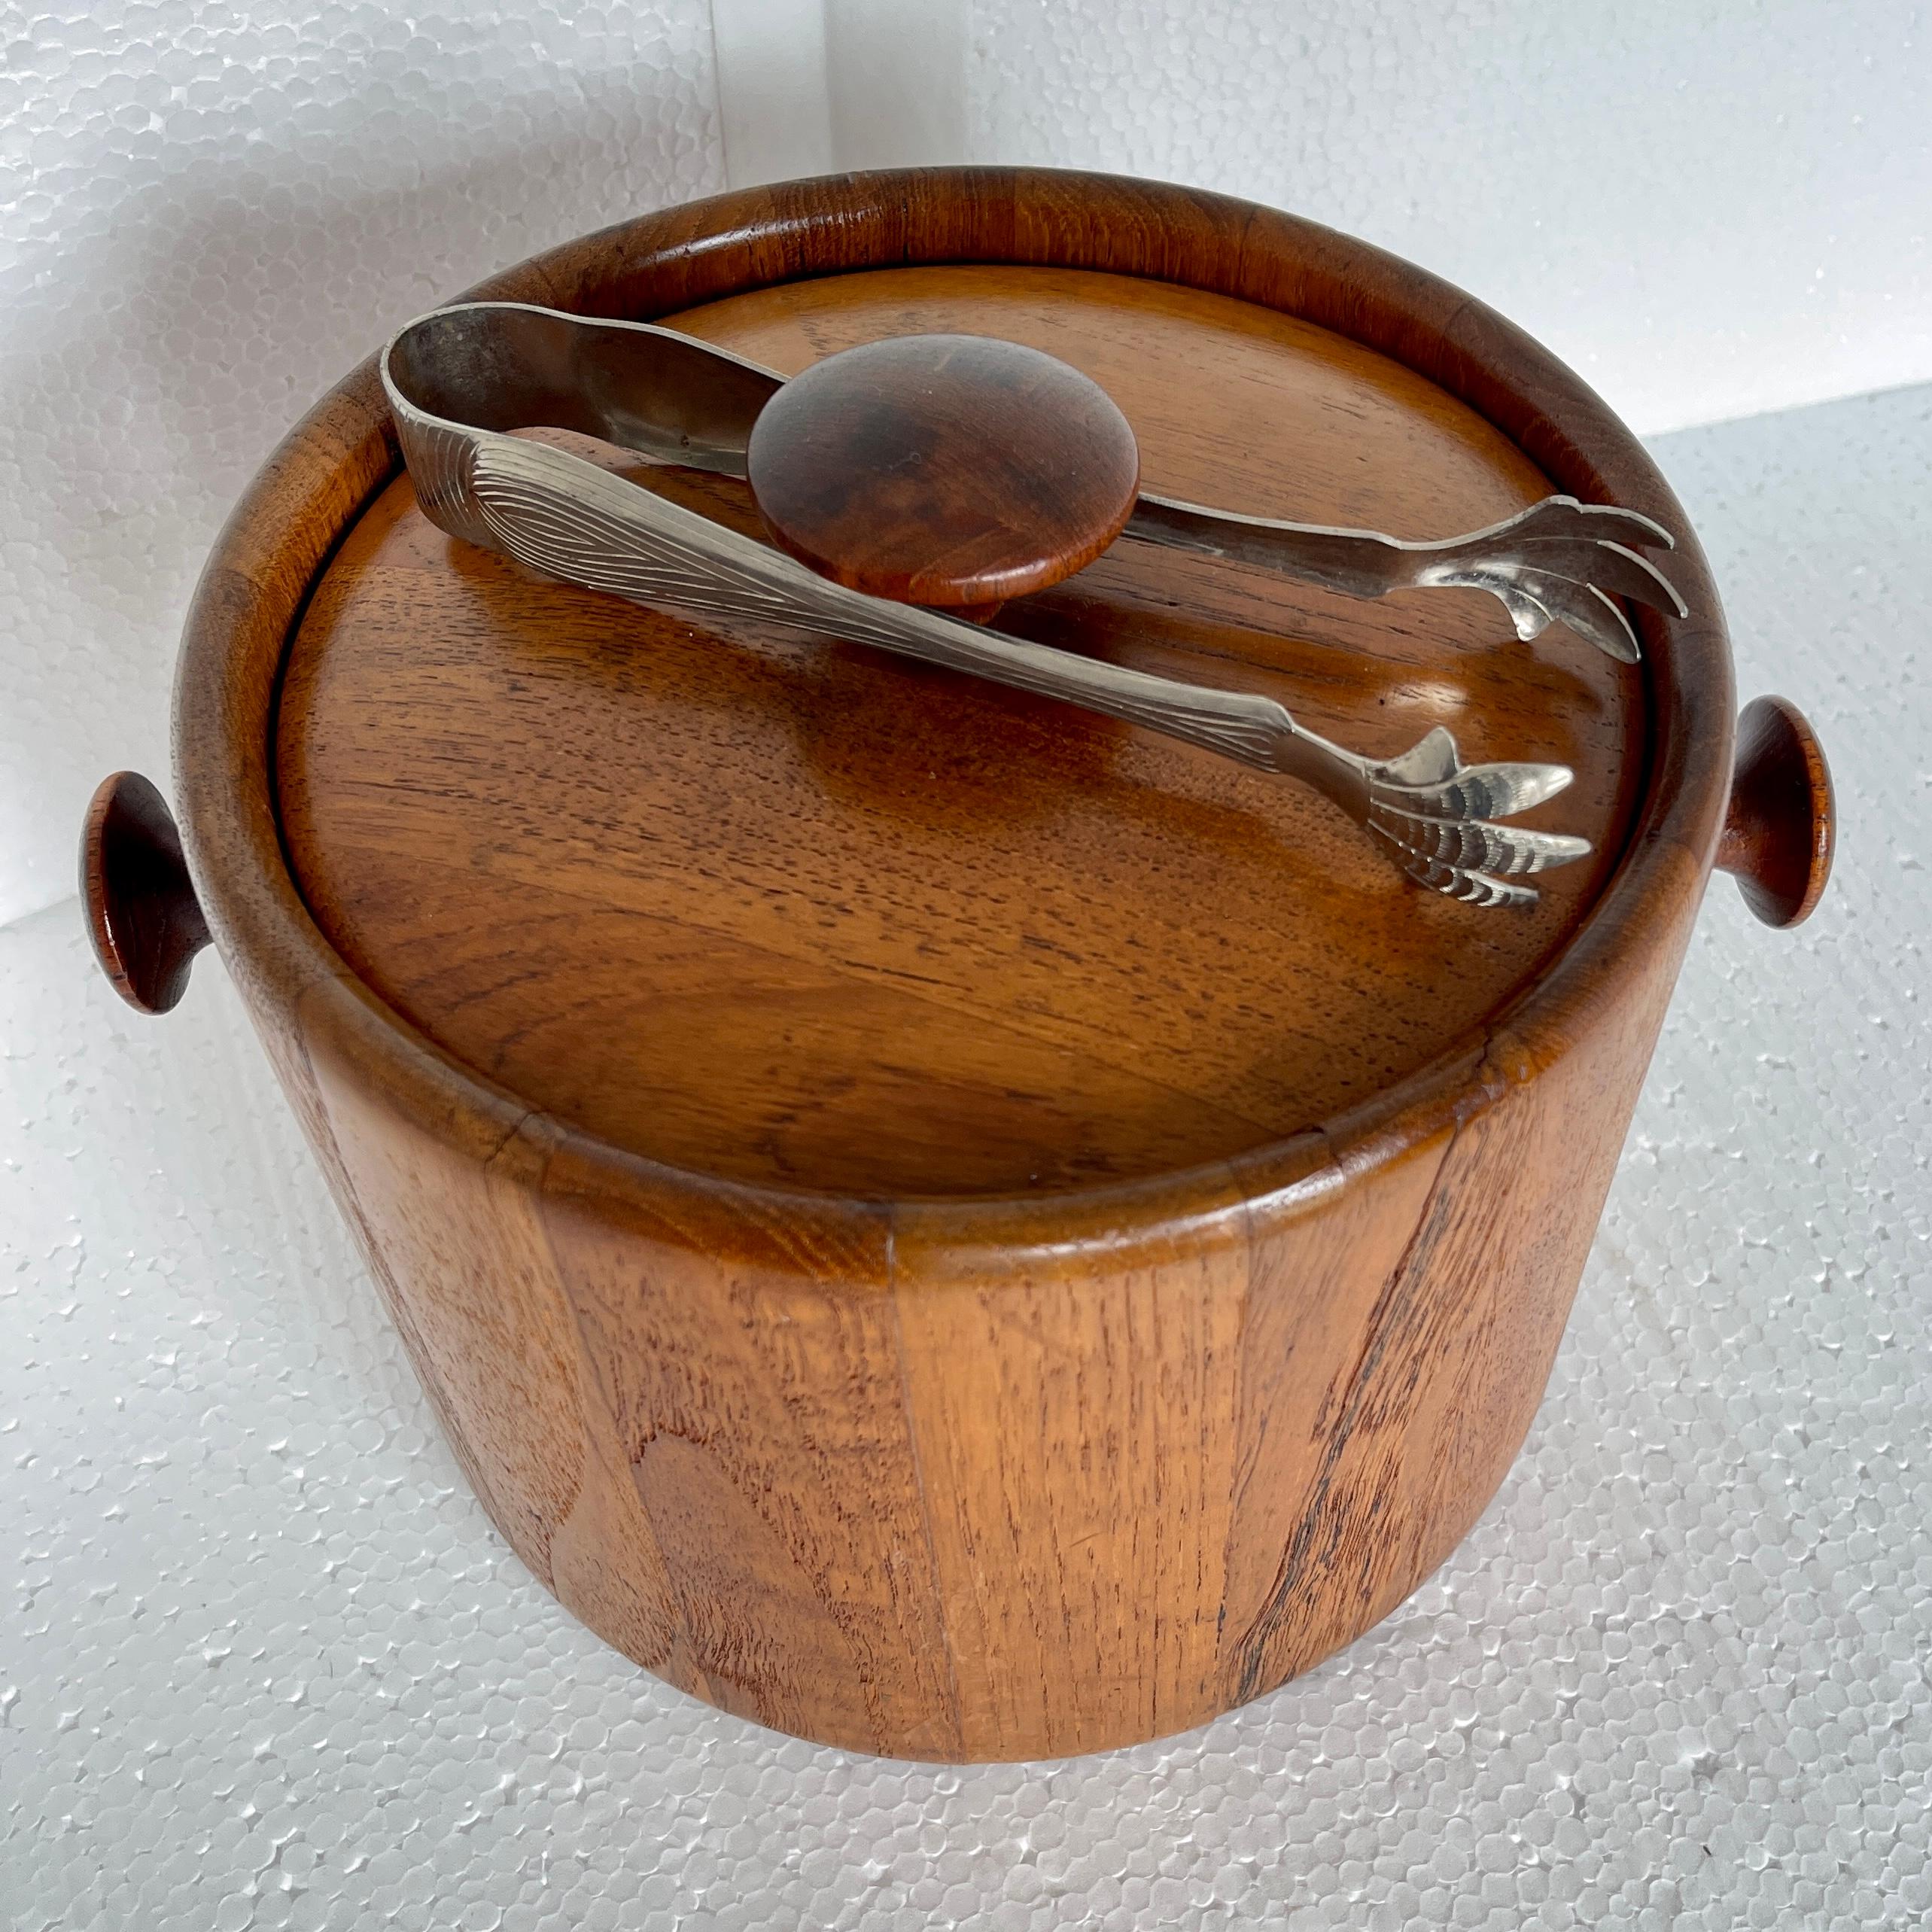 Vintage Danish Mid-Century Modern ice bucket, marked Digsmed. This beautifully crafted teak ice bucket dating from the 1960's is a classic example of Danish simplicity.  The teak is in very good condition as is the interior; perfect complement for